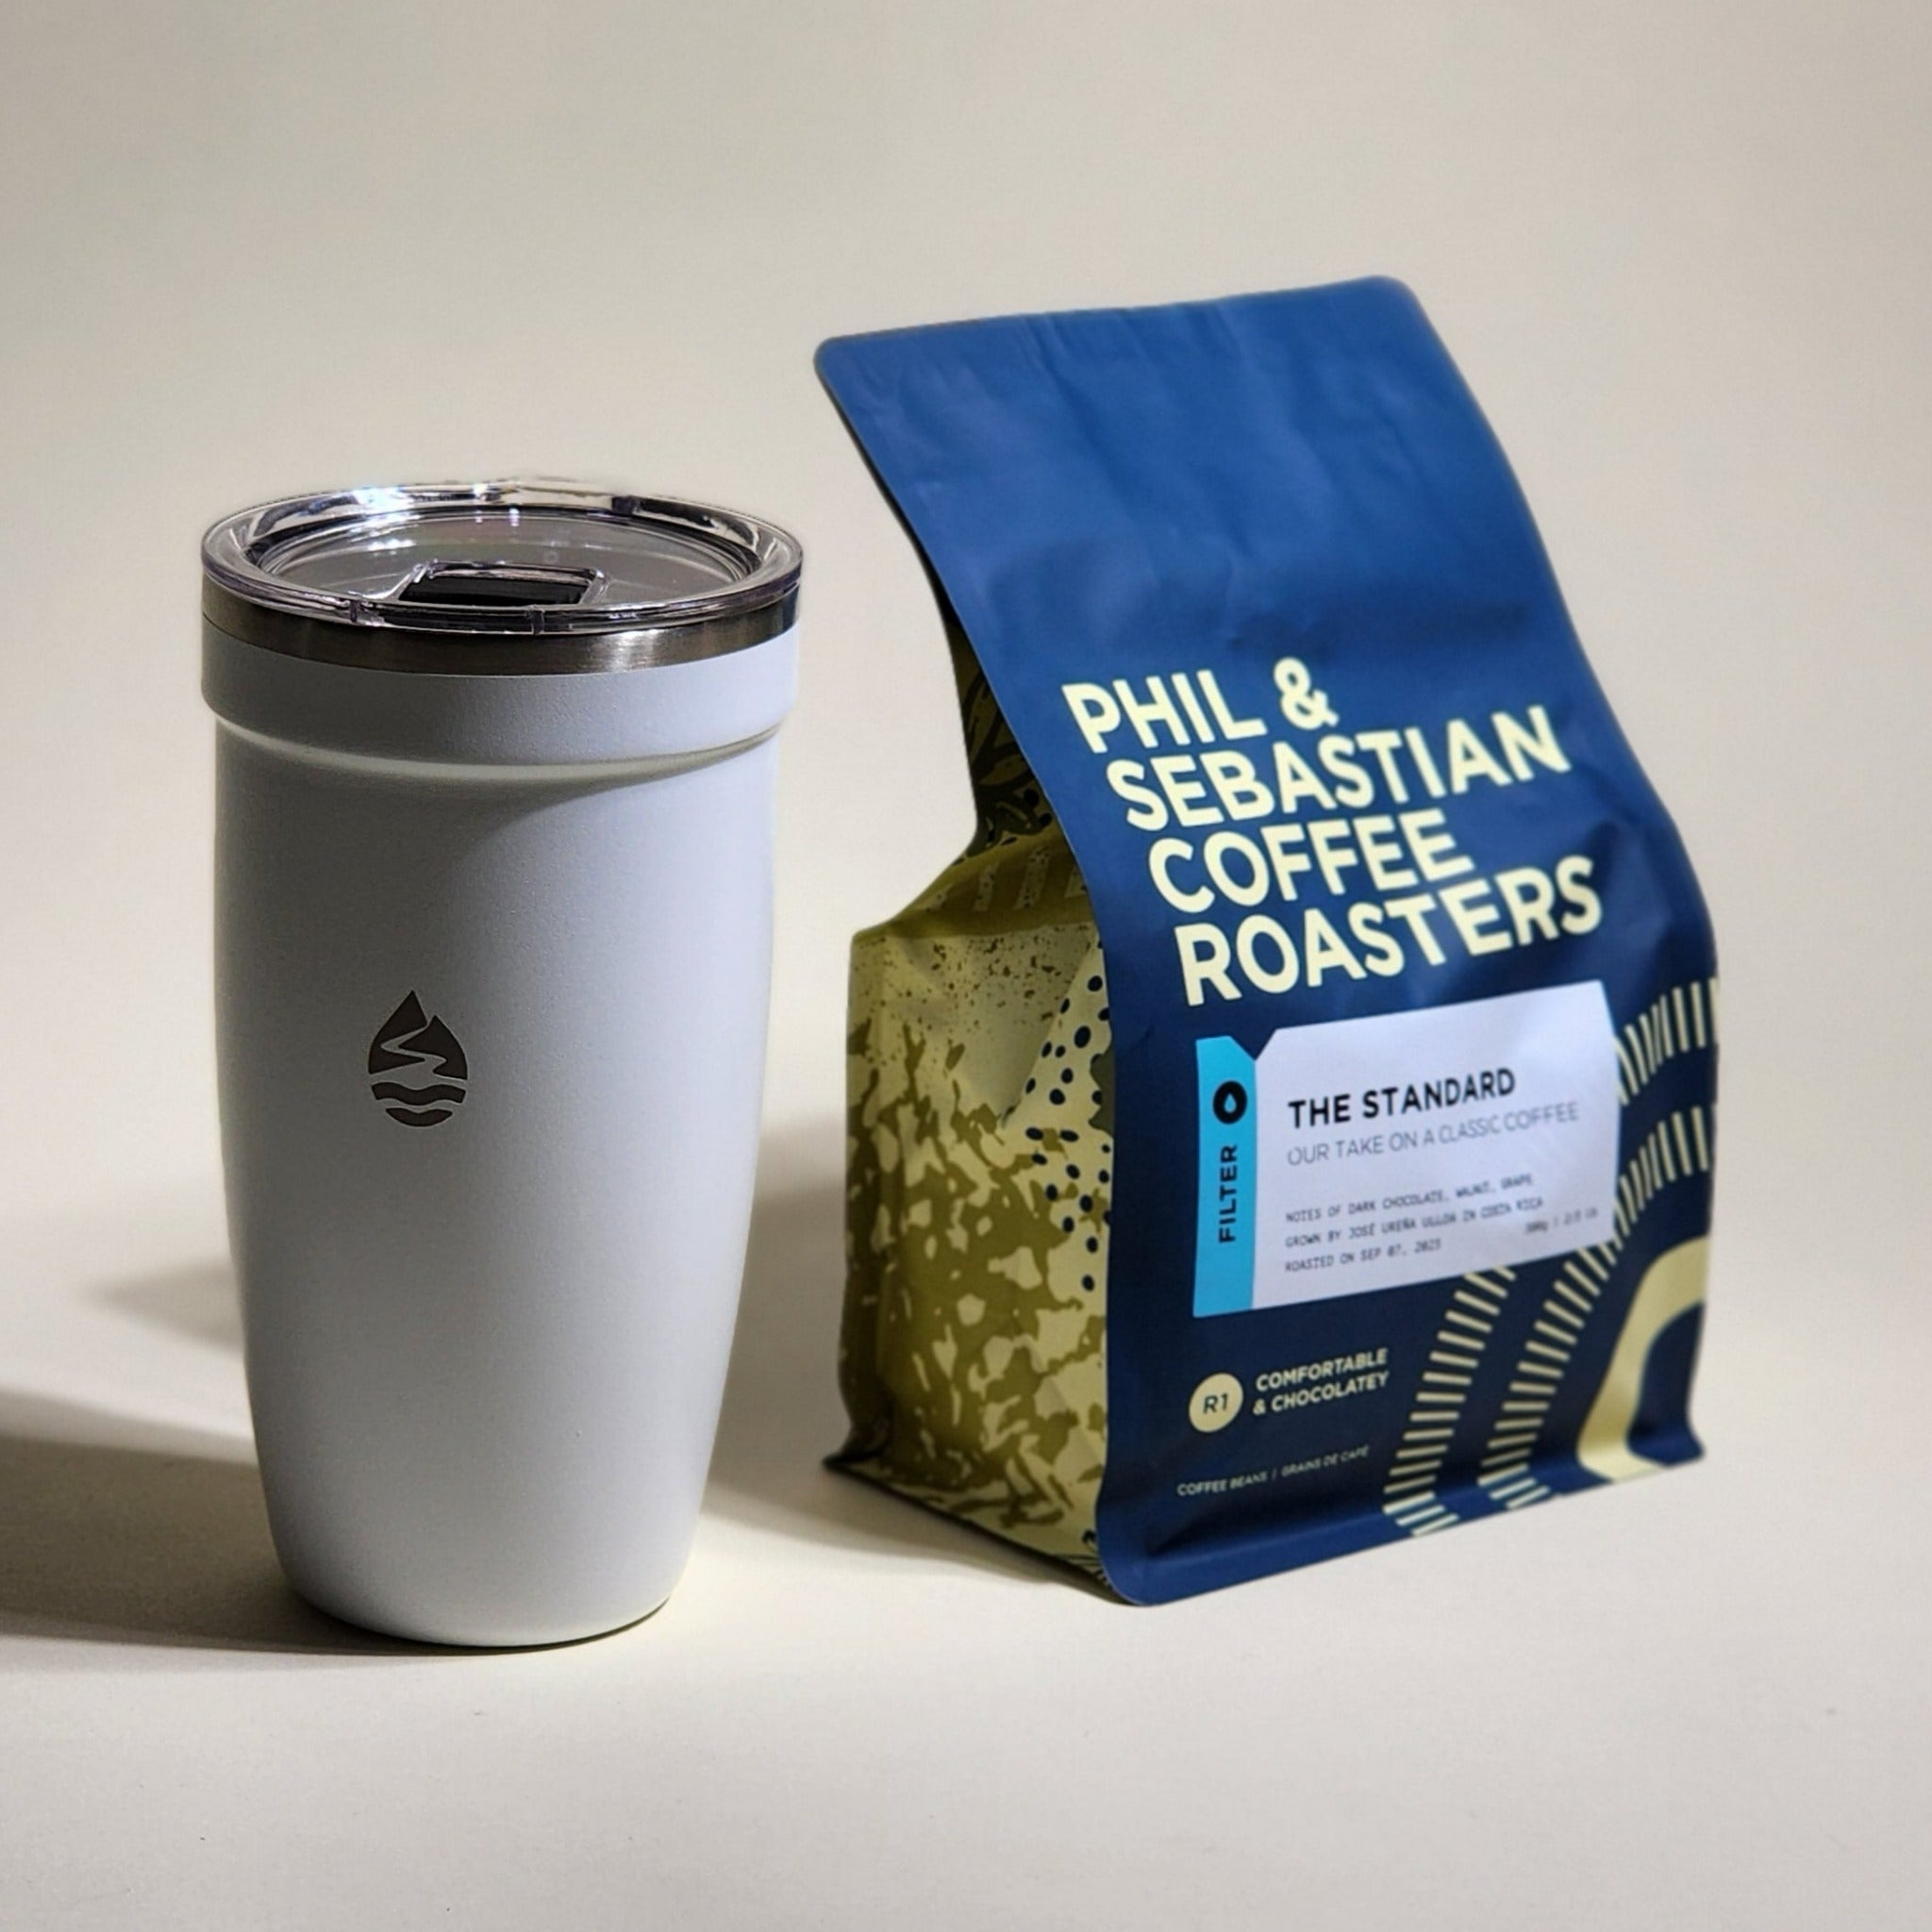 Phil & Sebastian Coffee Roasters' Standard Filter. Consistent flavor profile with sweet, chocolatey, and nutty notes. Sourced from individual farms and co-ops. Brew with parameters optimized for exceptional filter brewing.